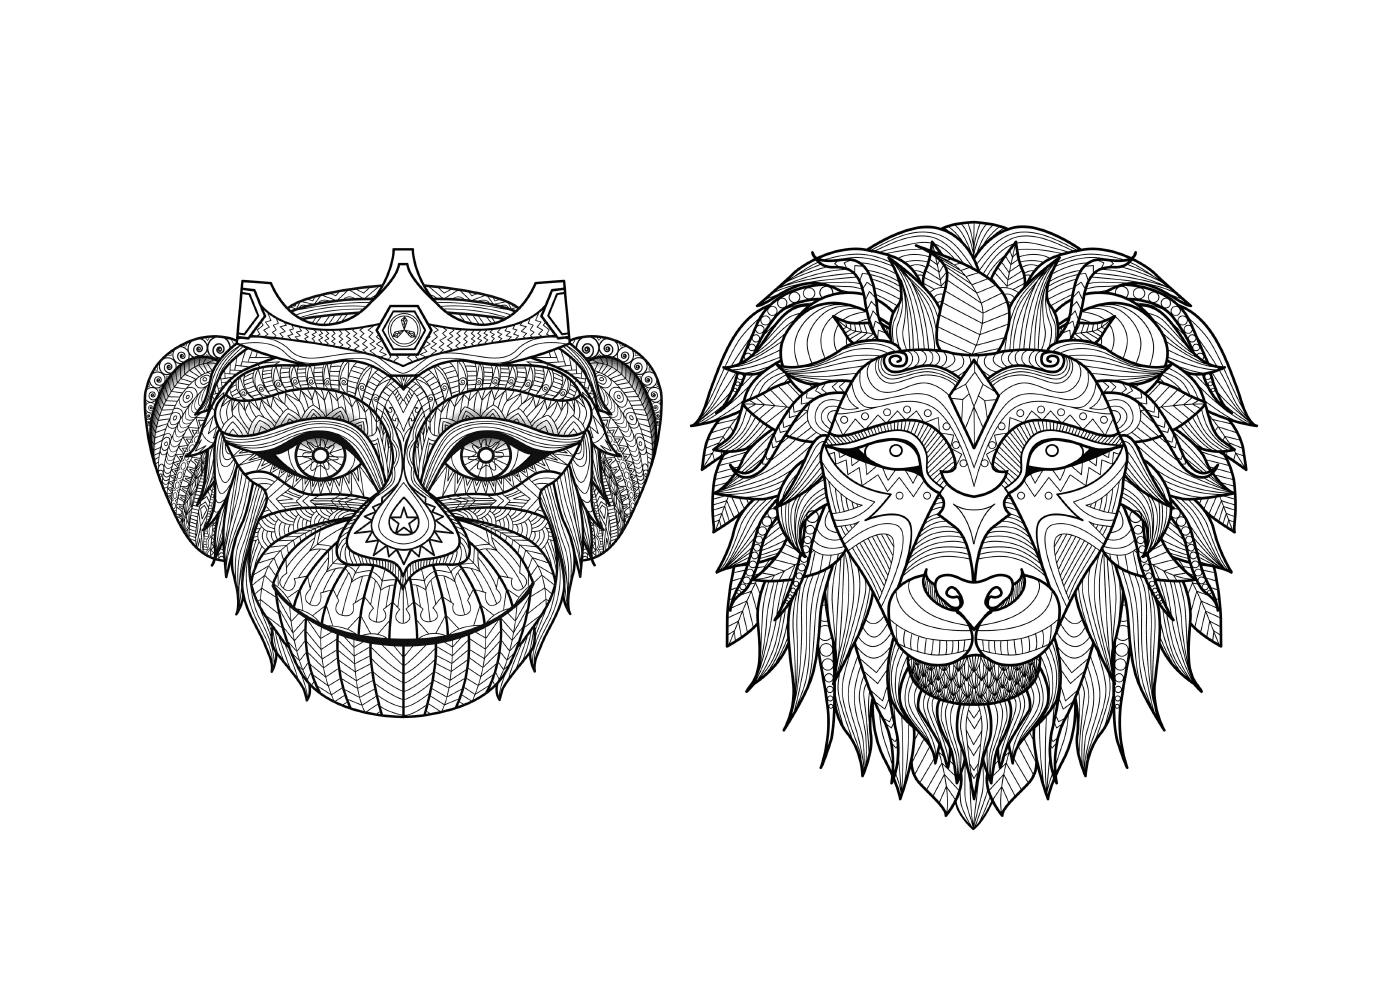  Two black and white drawings of a lion and a monkey 